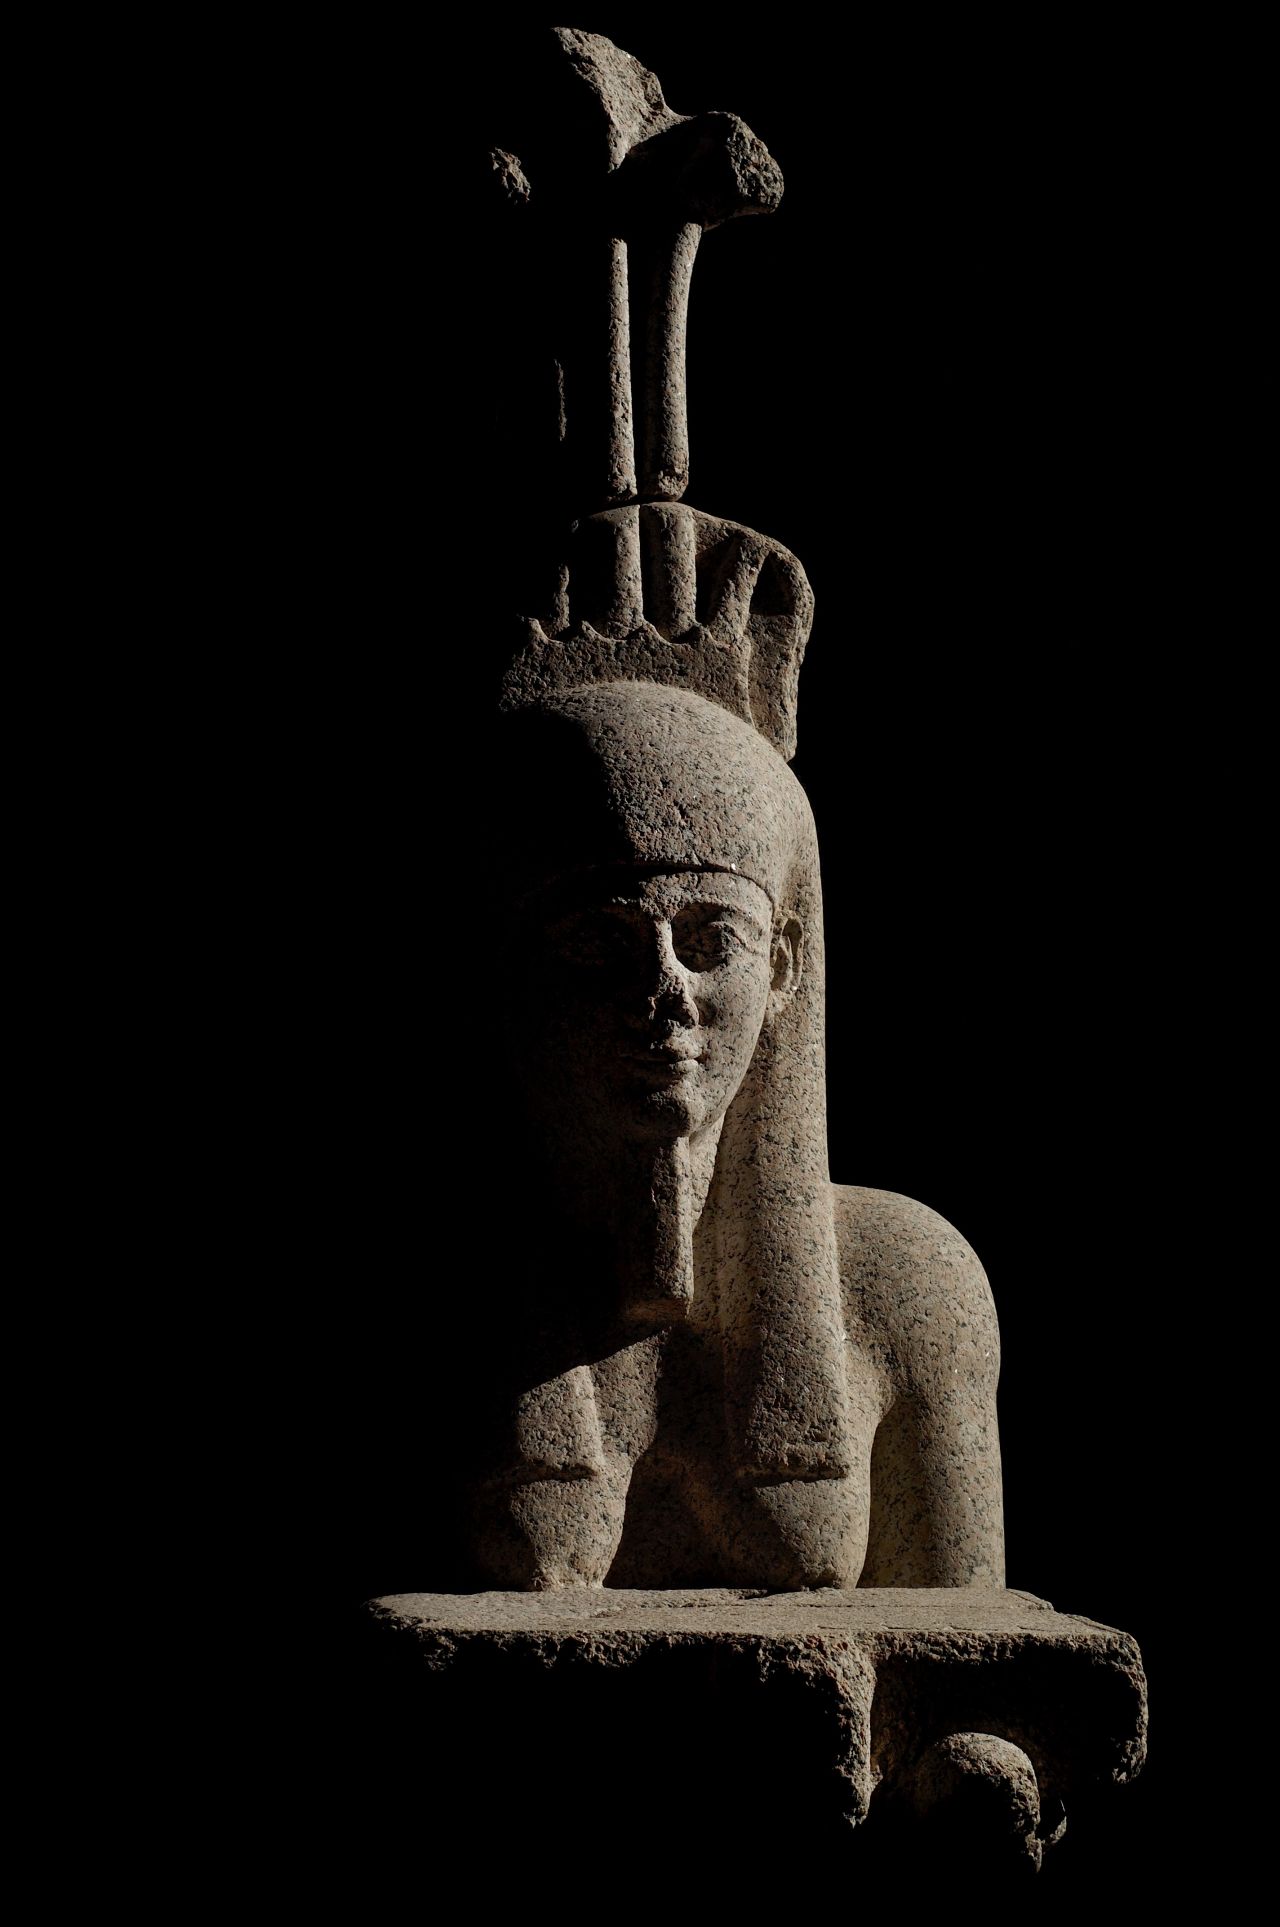 Hapy, god of the flooding of the Nile, was a symbol of abundance and fertility. The example on display dates from the Early Ptolemaic period. During that time, the Greek rulers of Canopus and Thonis- Heracleion commissioned statues of their likeness, though they also made sure to feature Egyptian affectations. The example on display dates from the 4th century BC. A century later, the Greek rulers of Egypt, the Ptolemies, added statues of their likeness next to Hapy colossus and made sure to feature Egyptian affectations<br />